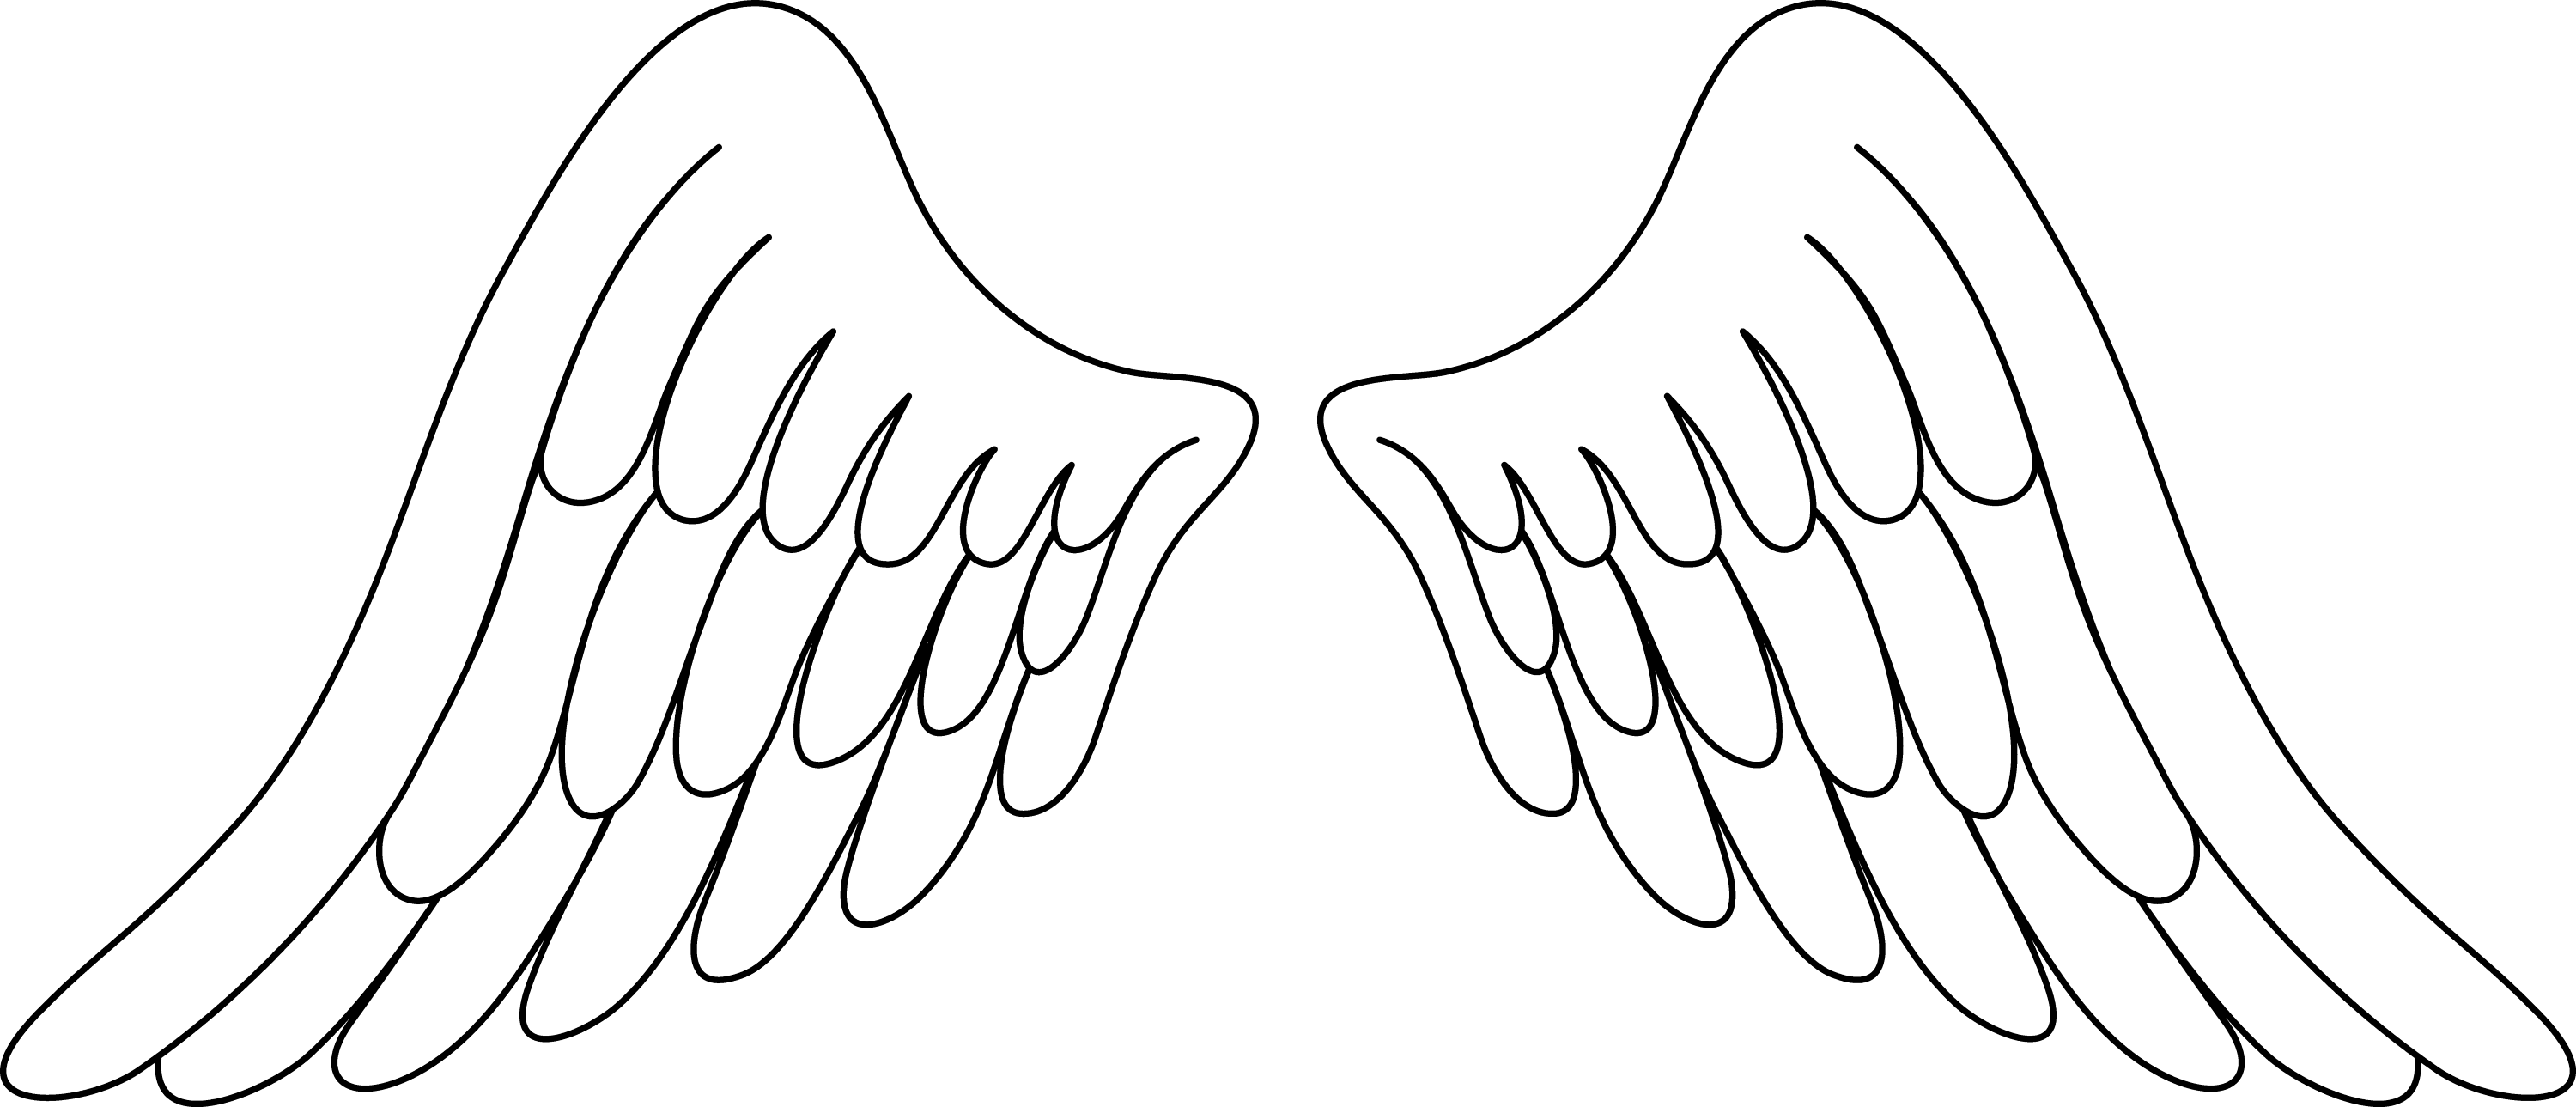 free black and white clipart of angels - photo #44